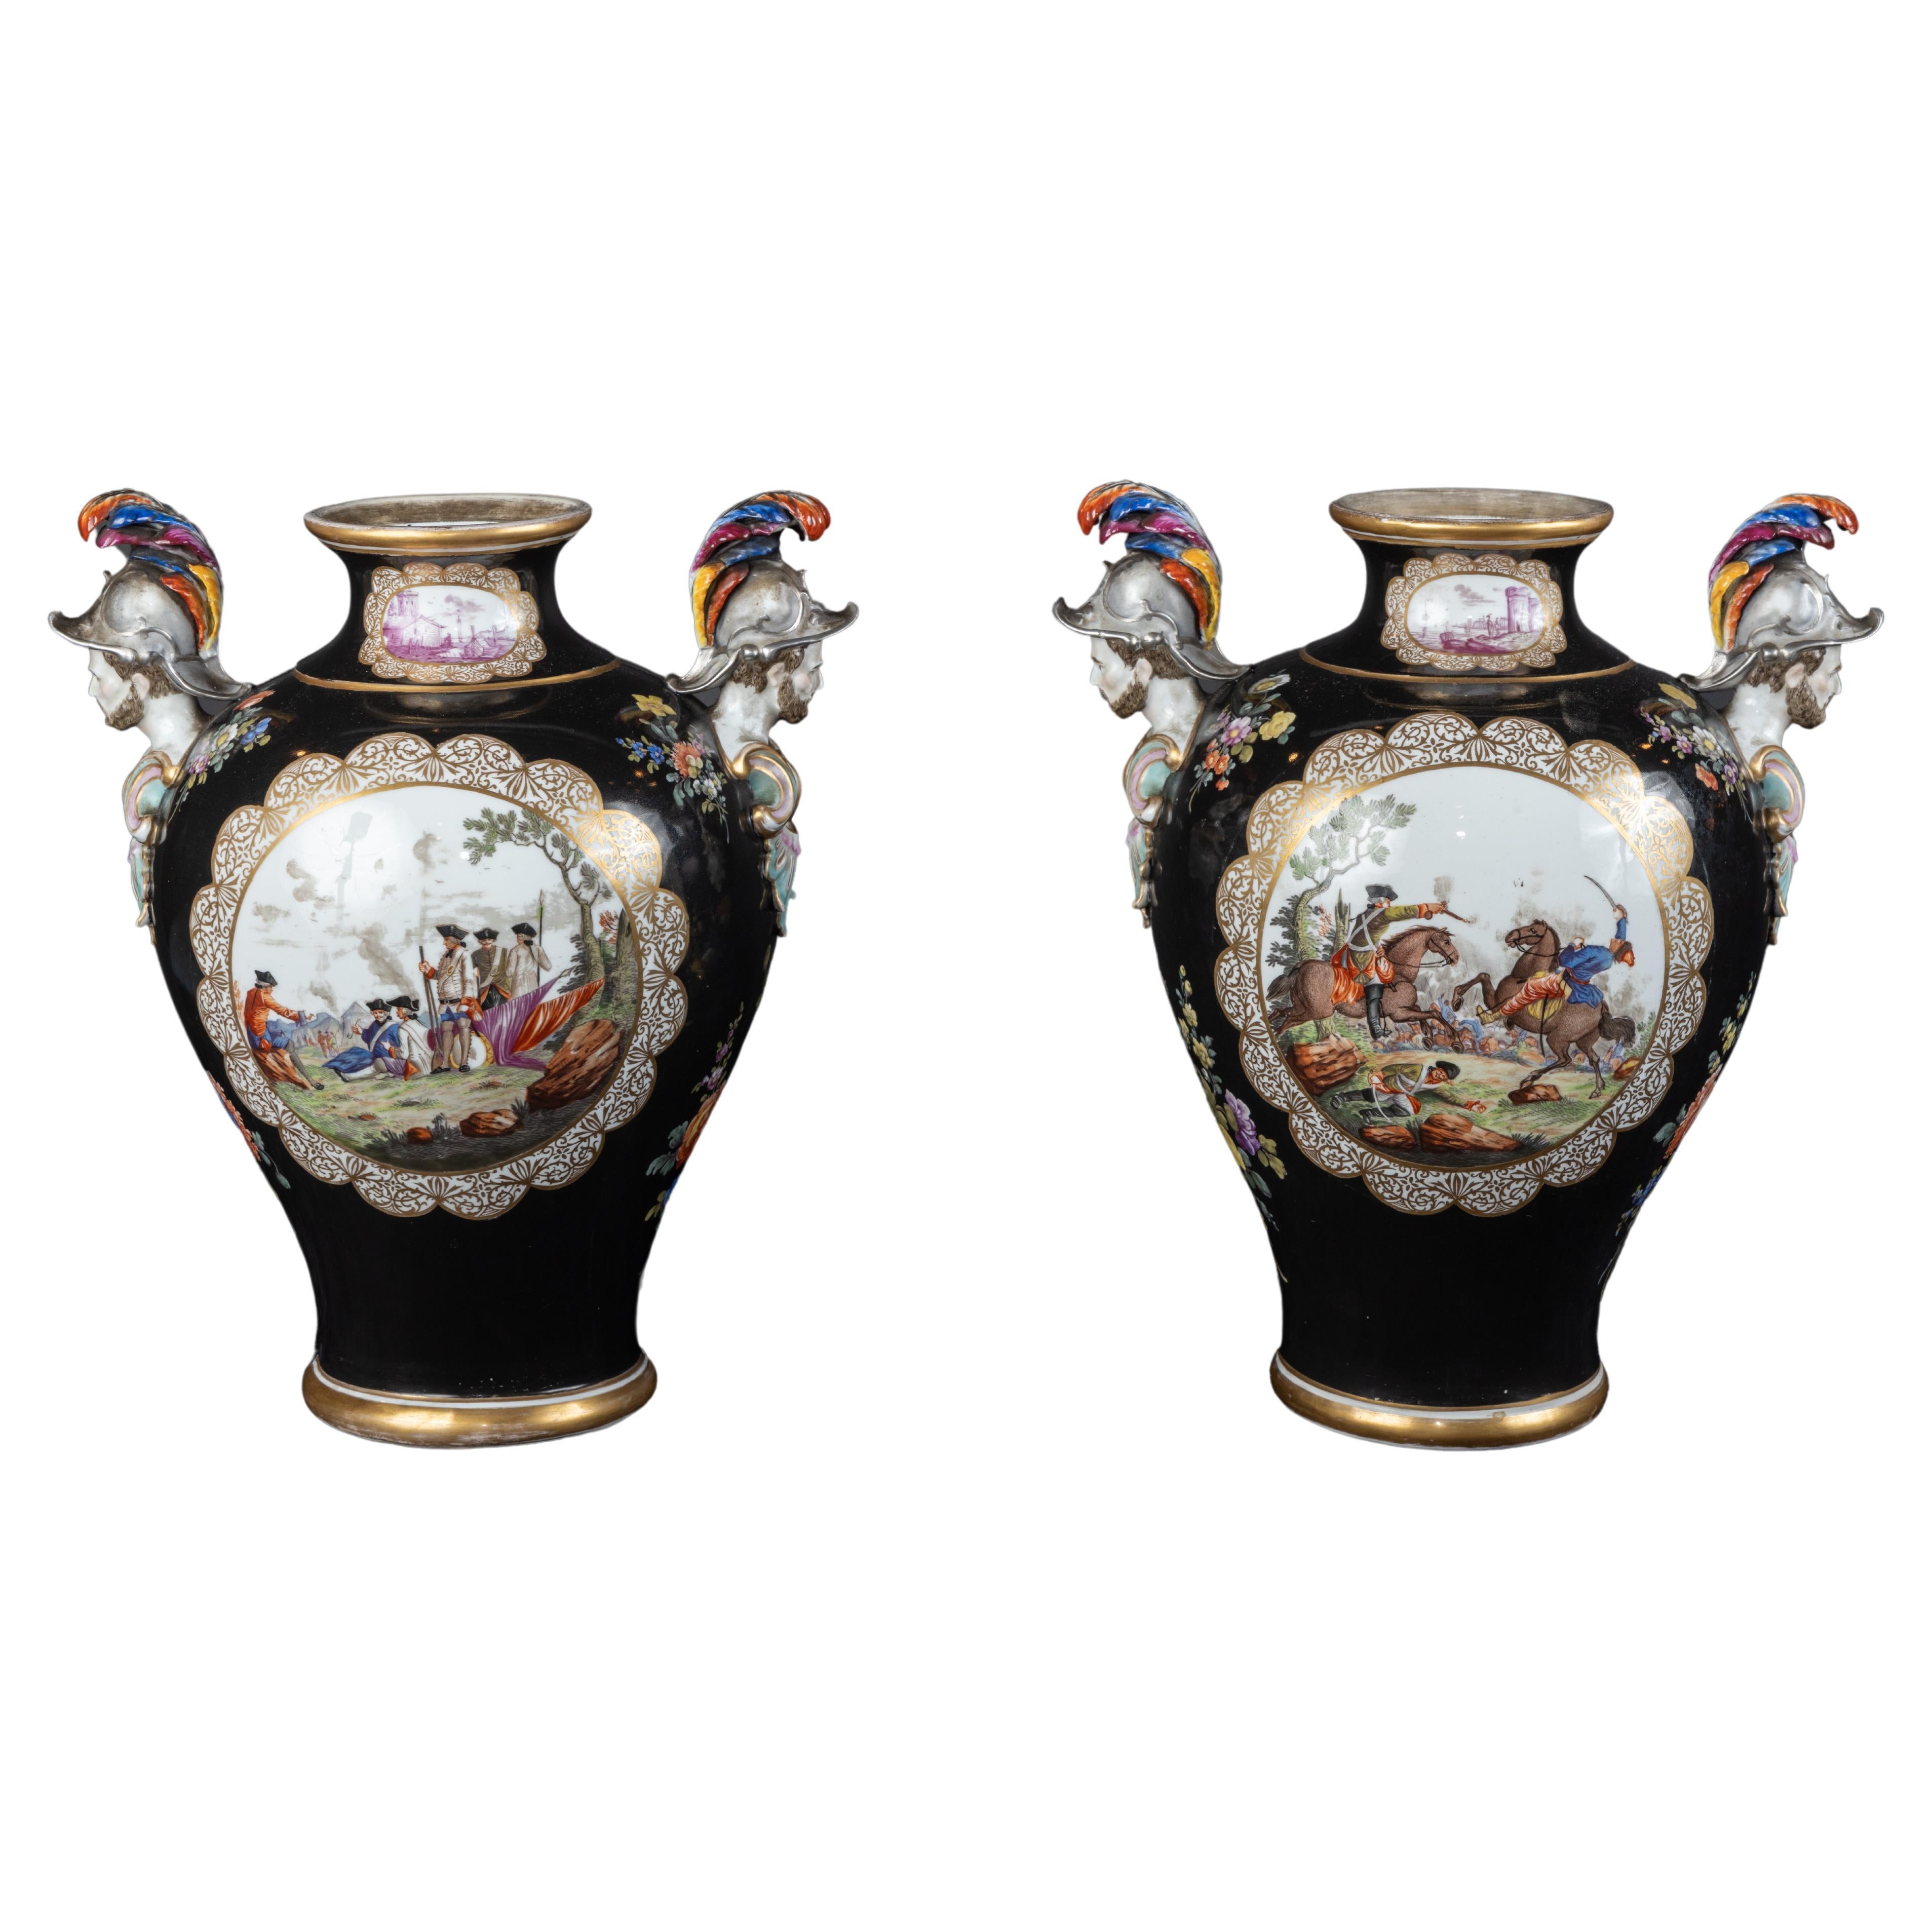 Exquisite Pair of Augustus Rex Porcelain Vases, Early 19th Century, Marked 